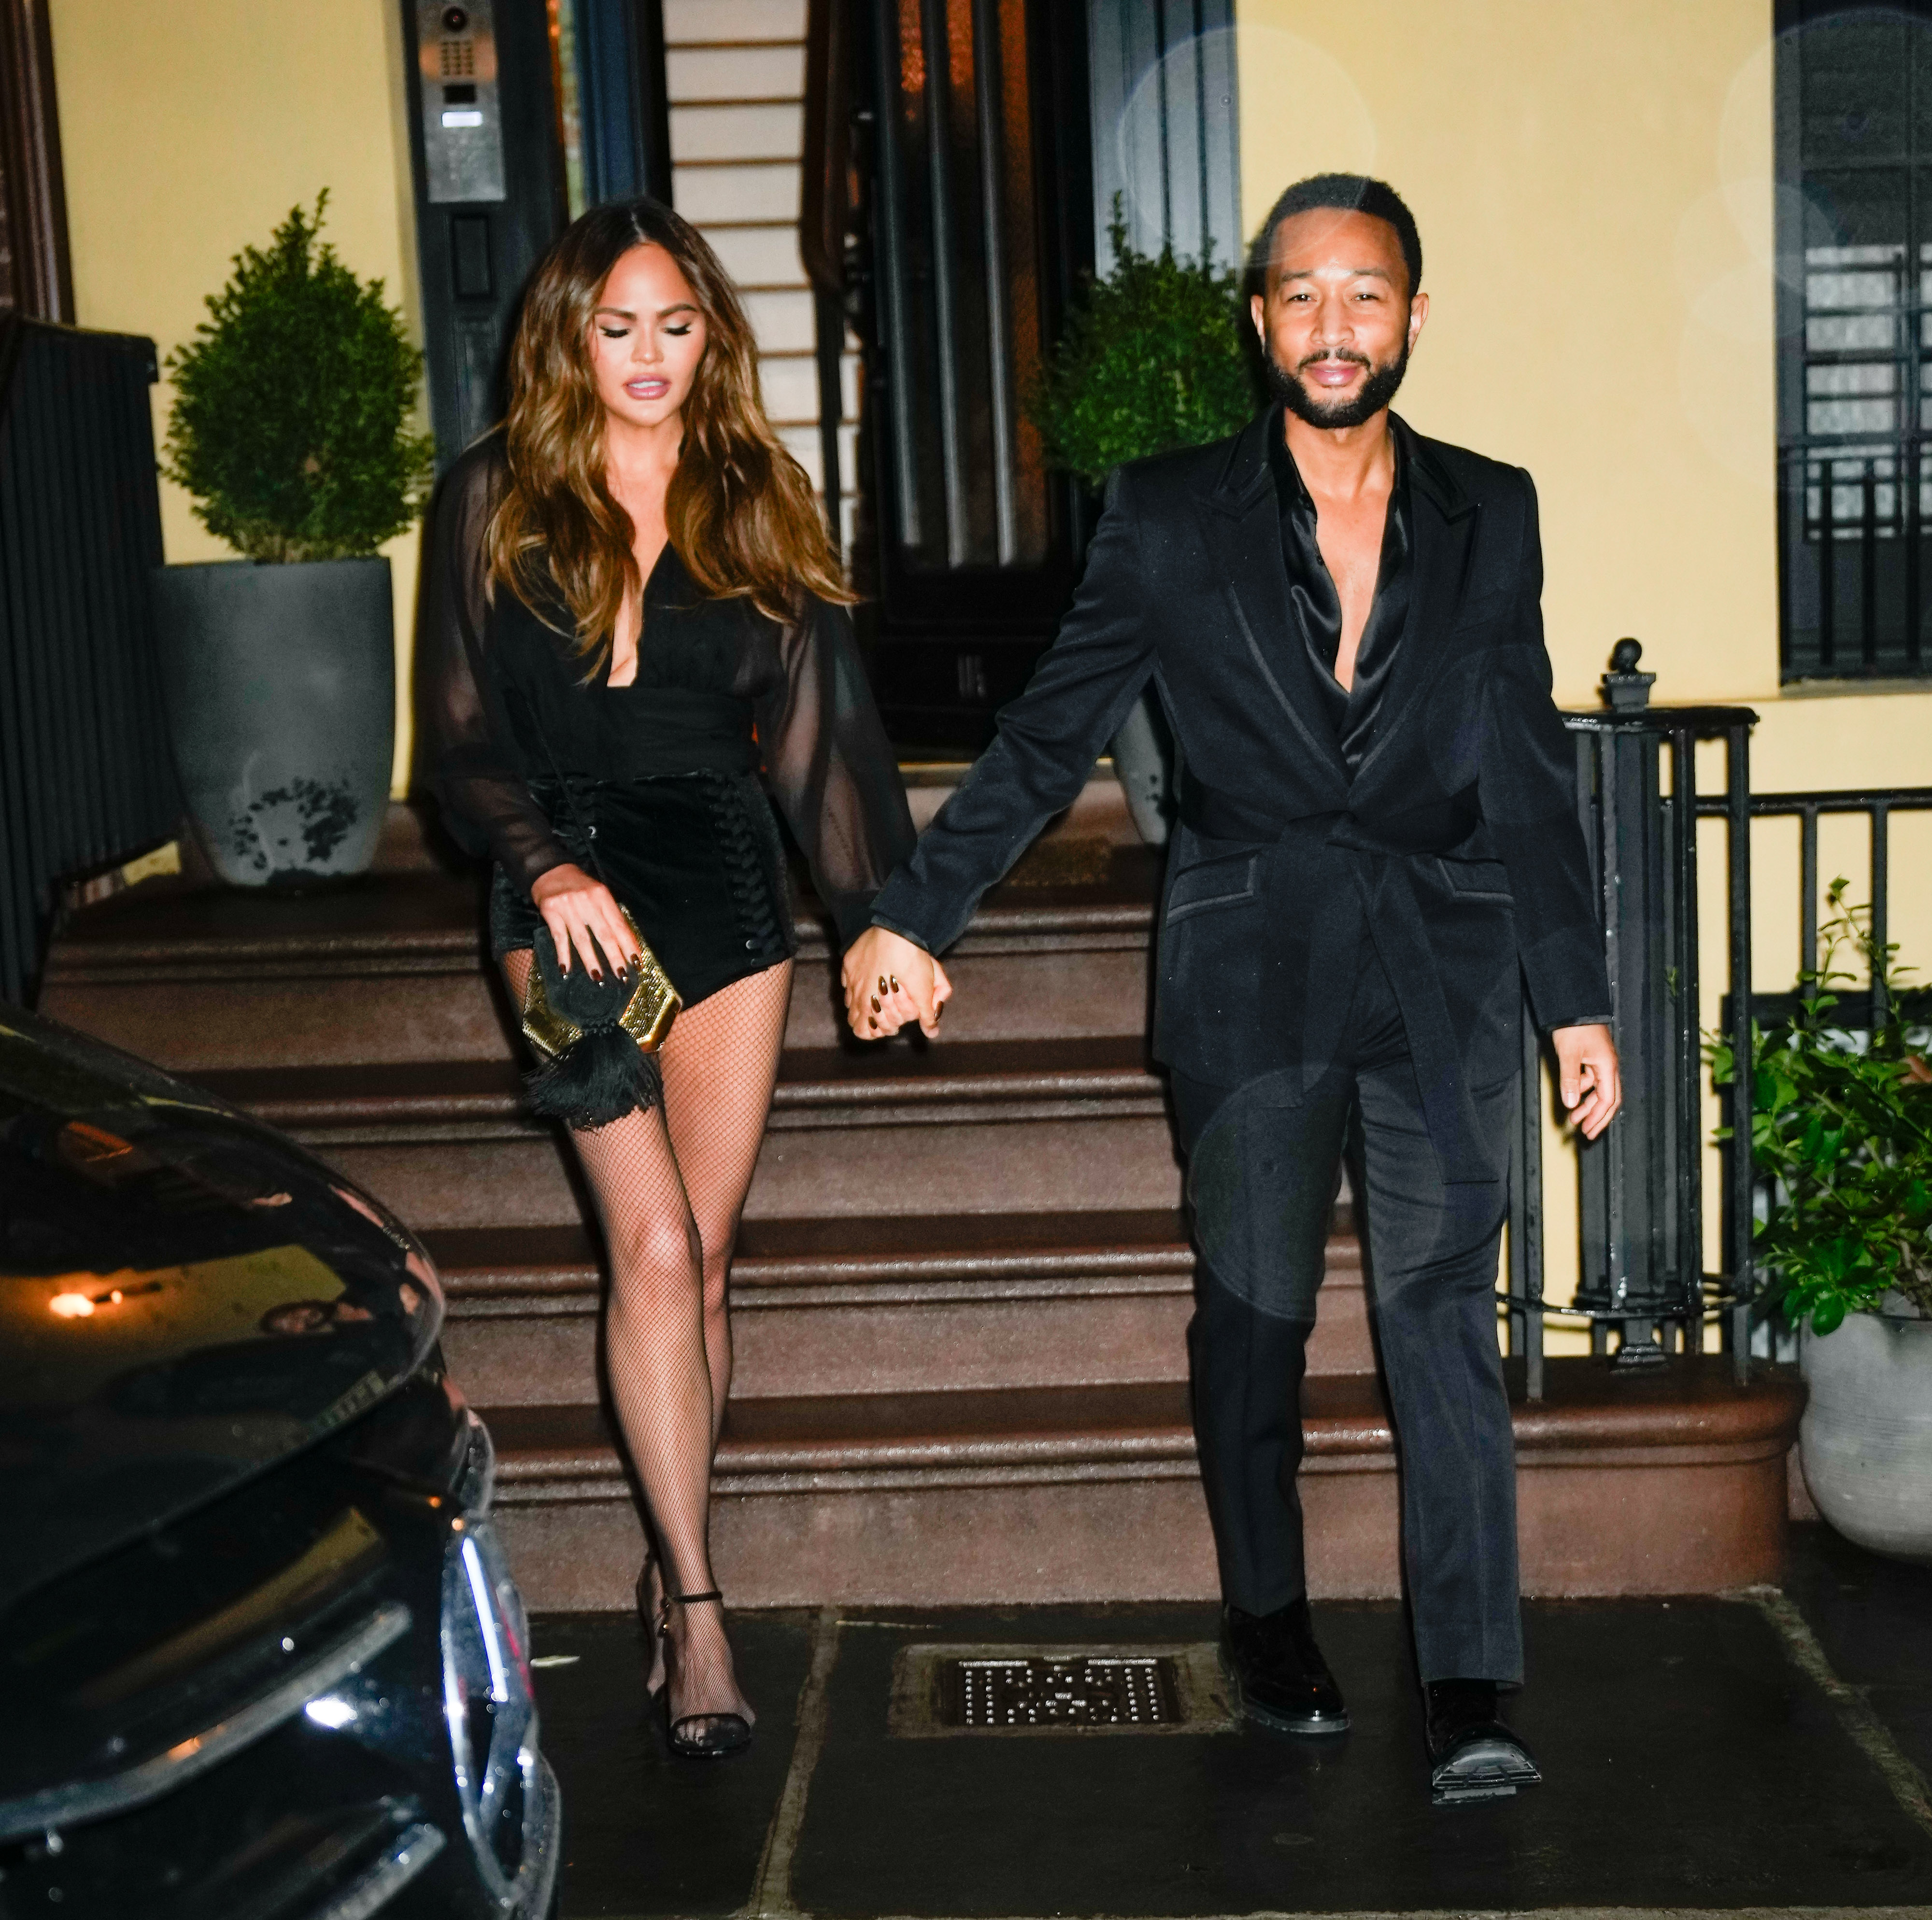 Chrissy showed off her long, model legs in a pair of netted tights and black velvet bottoms as she and John exited the restaurant